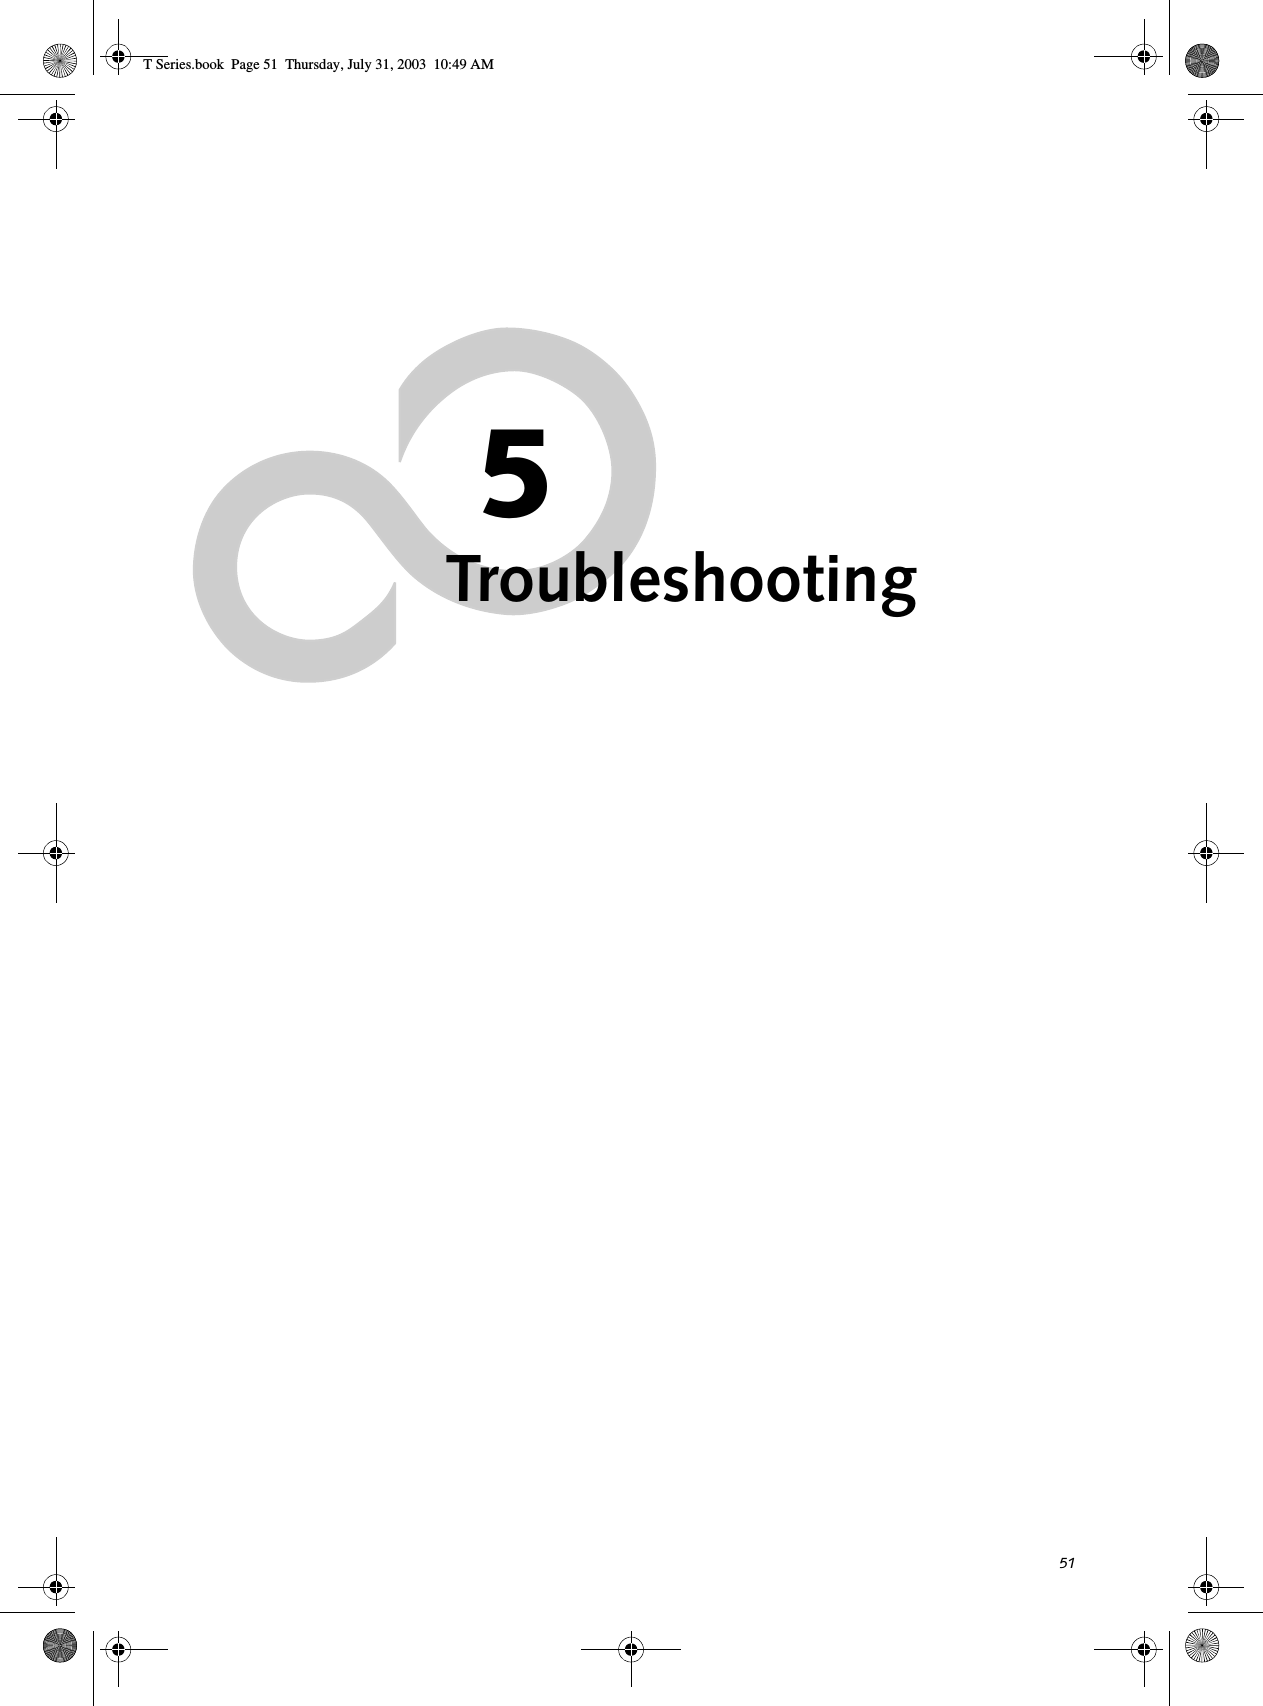 515TroubleshootingT Series.book  Page 51  Thursday, July 31, 2003  10:49 AM